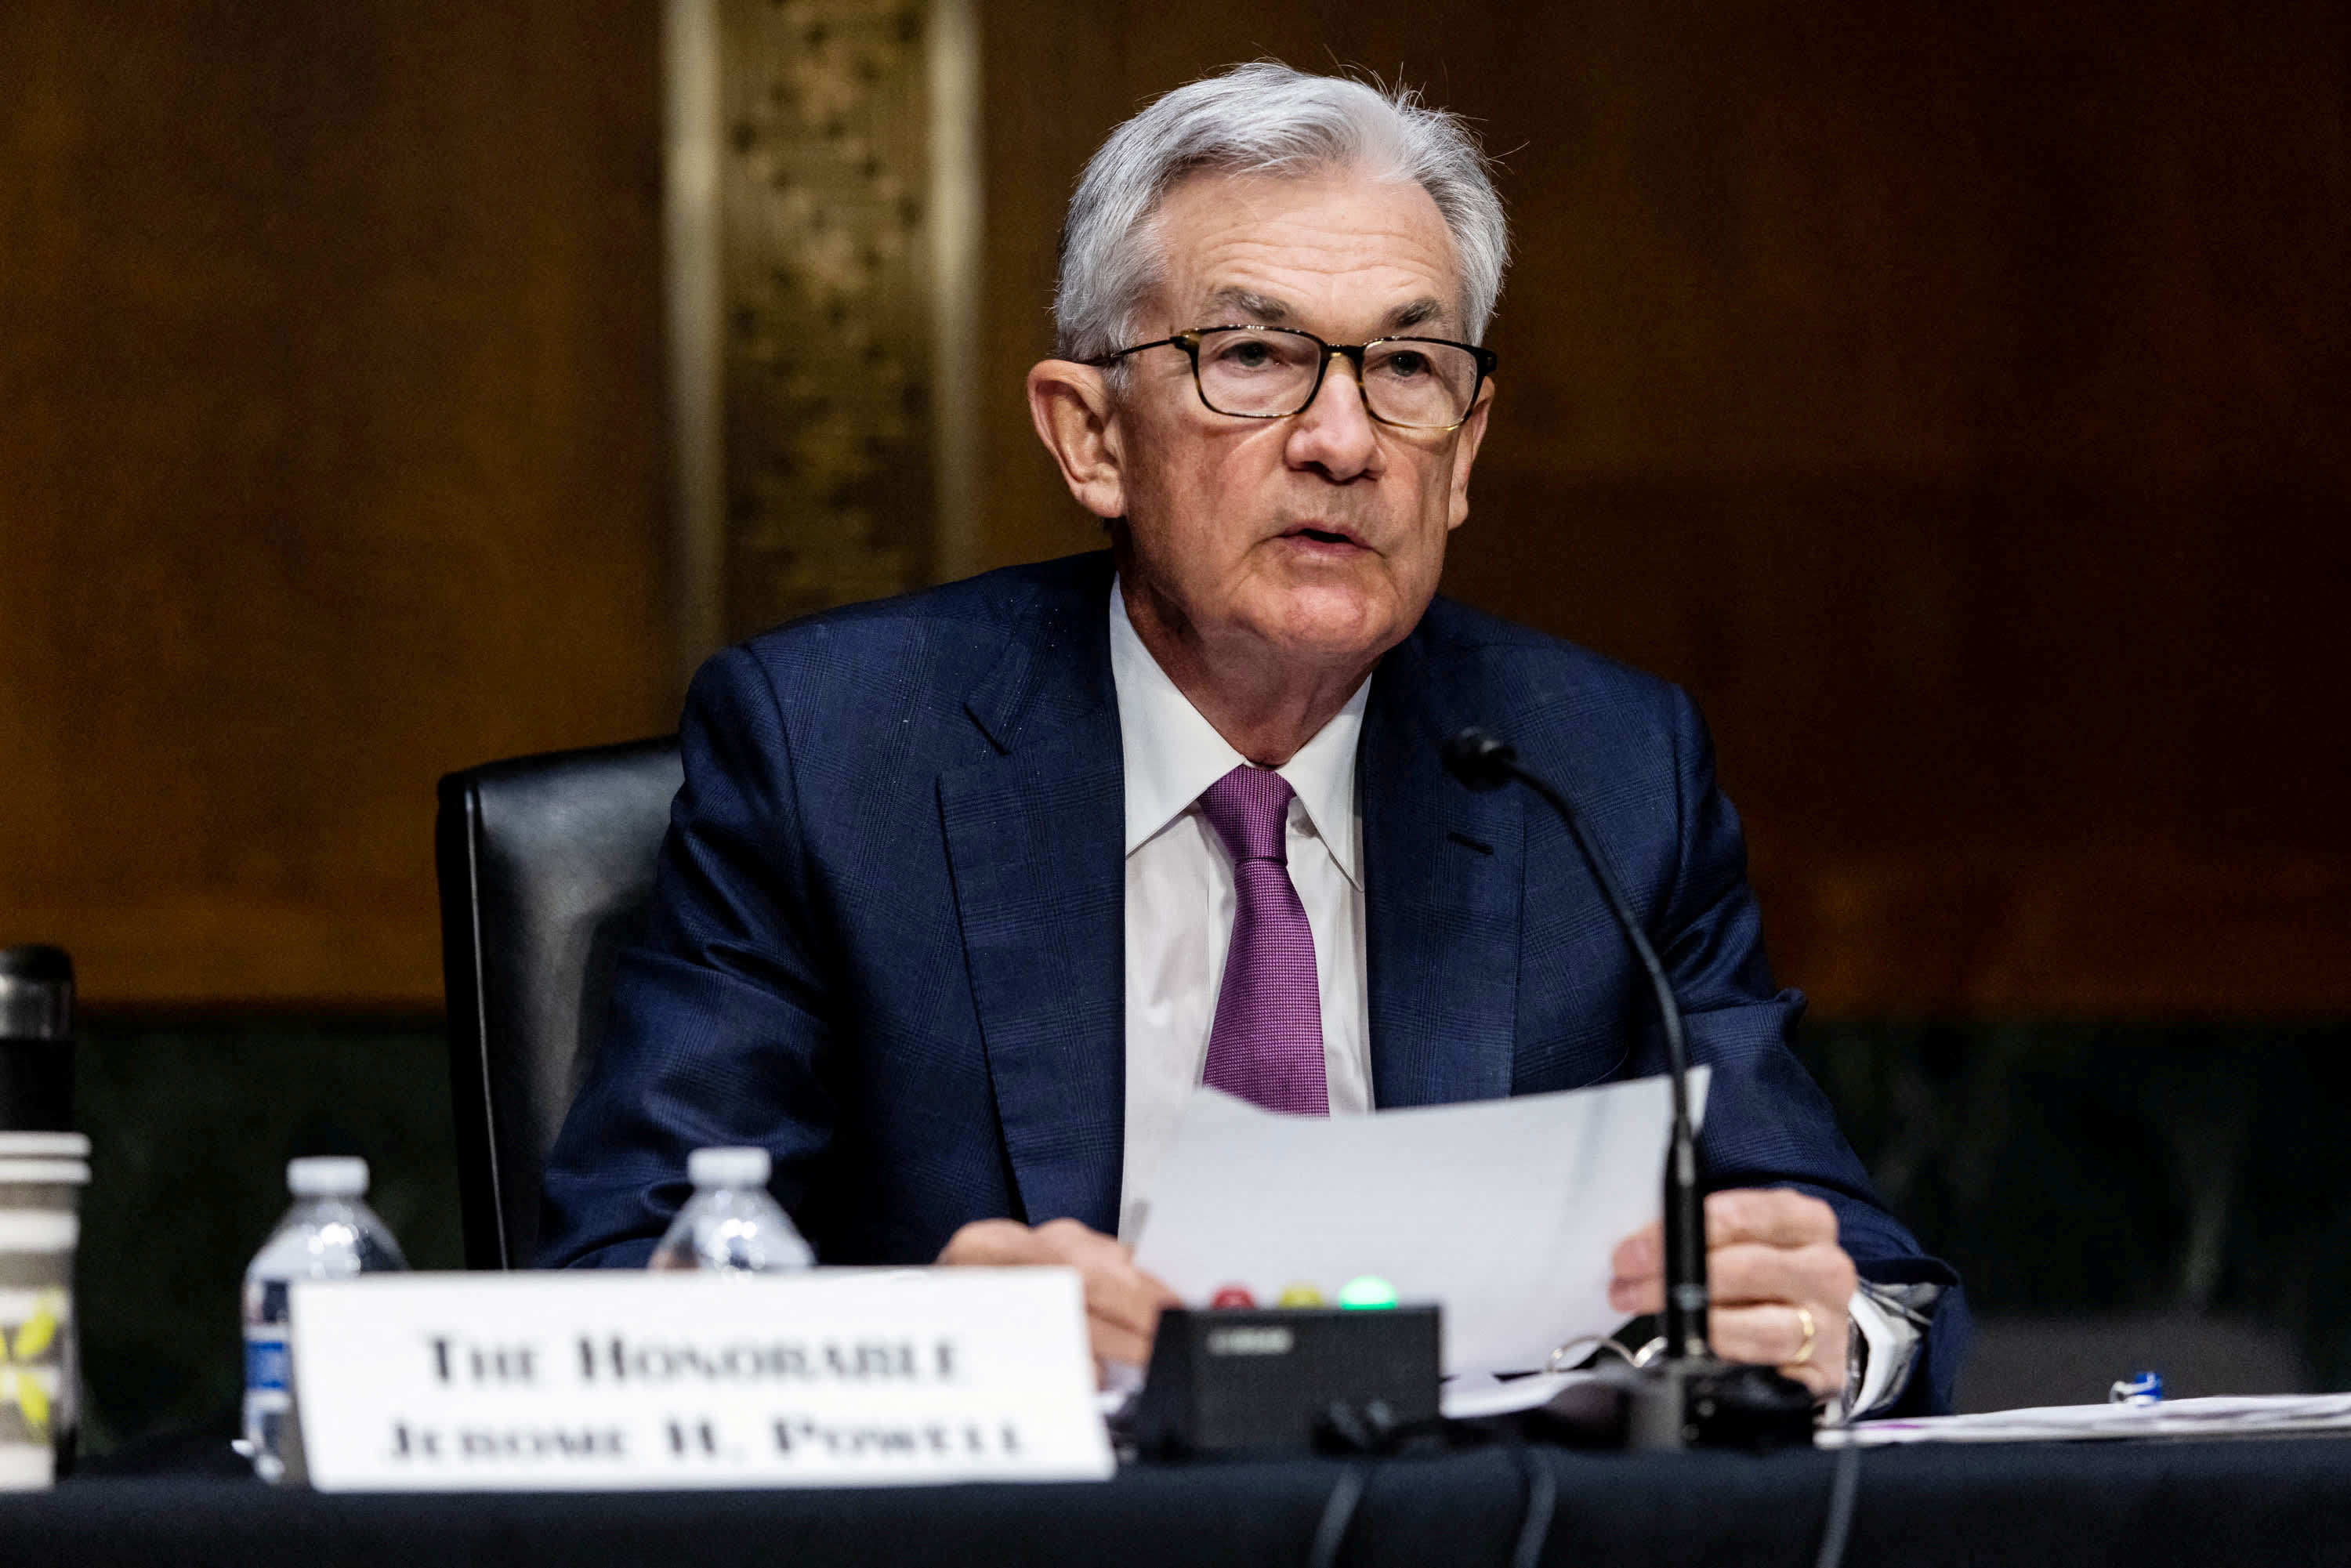 Watch Fed Chair Jerome Powell testify live at his Senate confirmation hearing